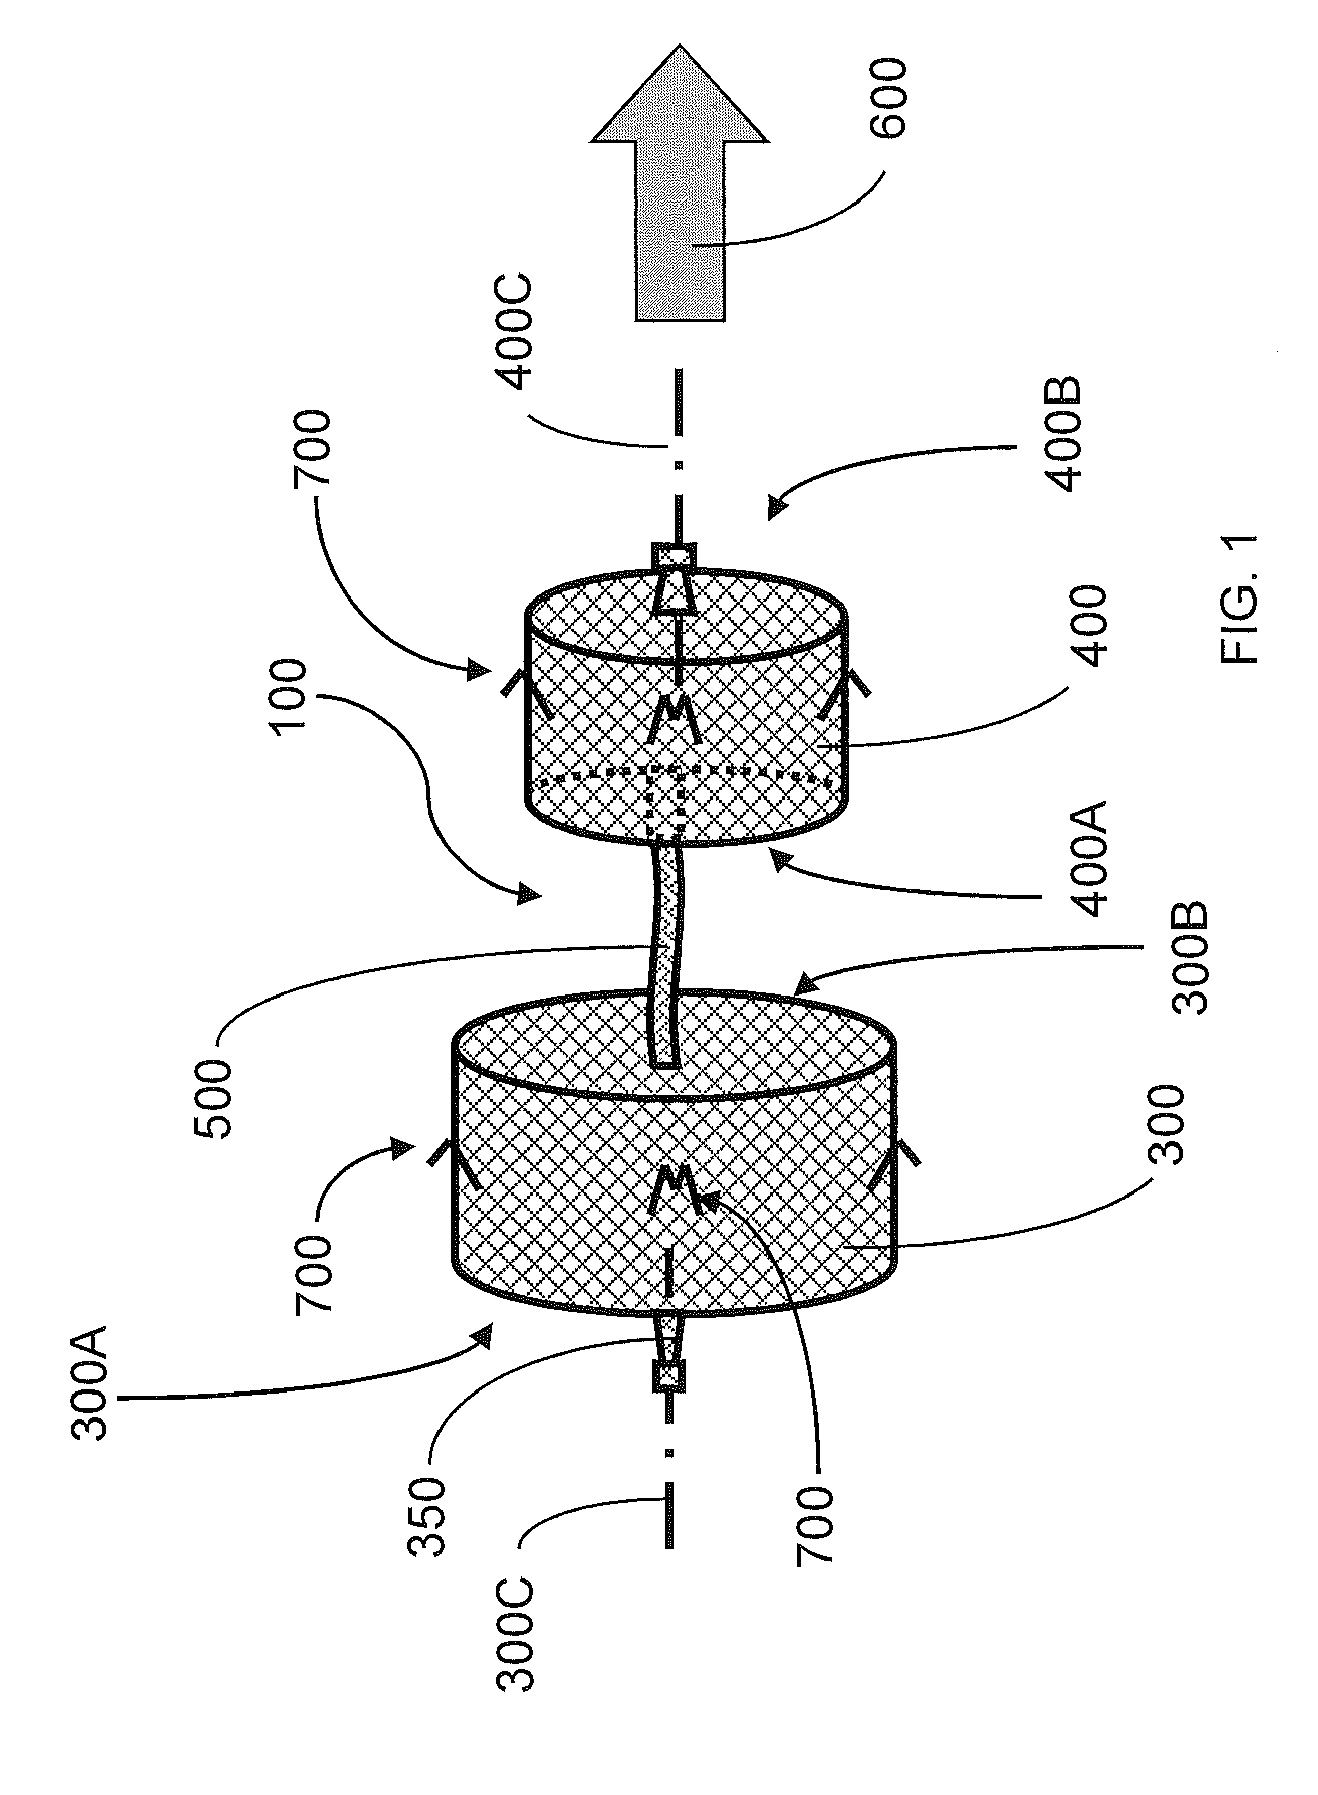 Occlusion device and associated deployment method